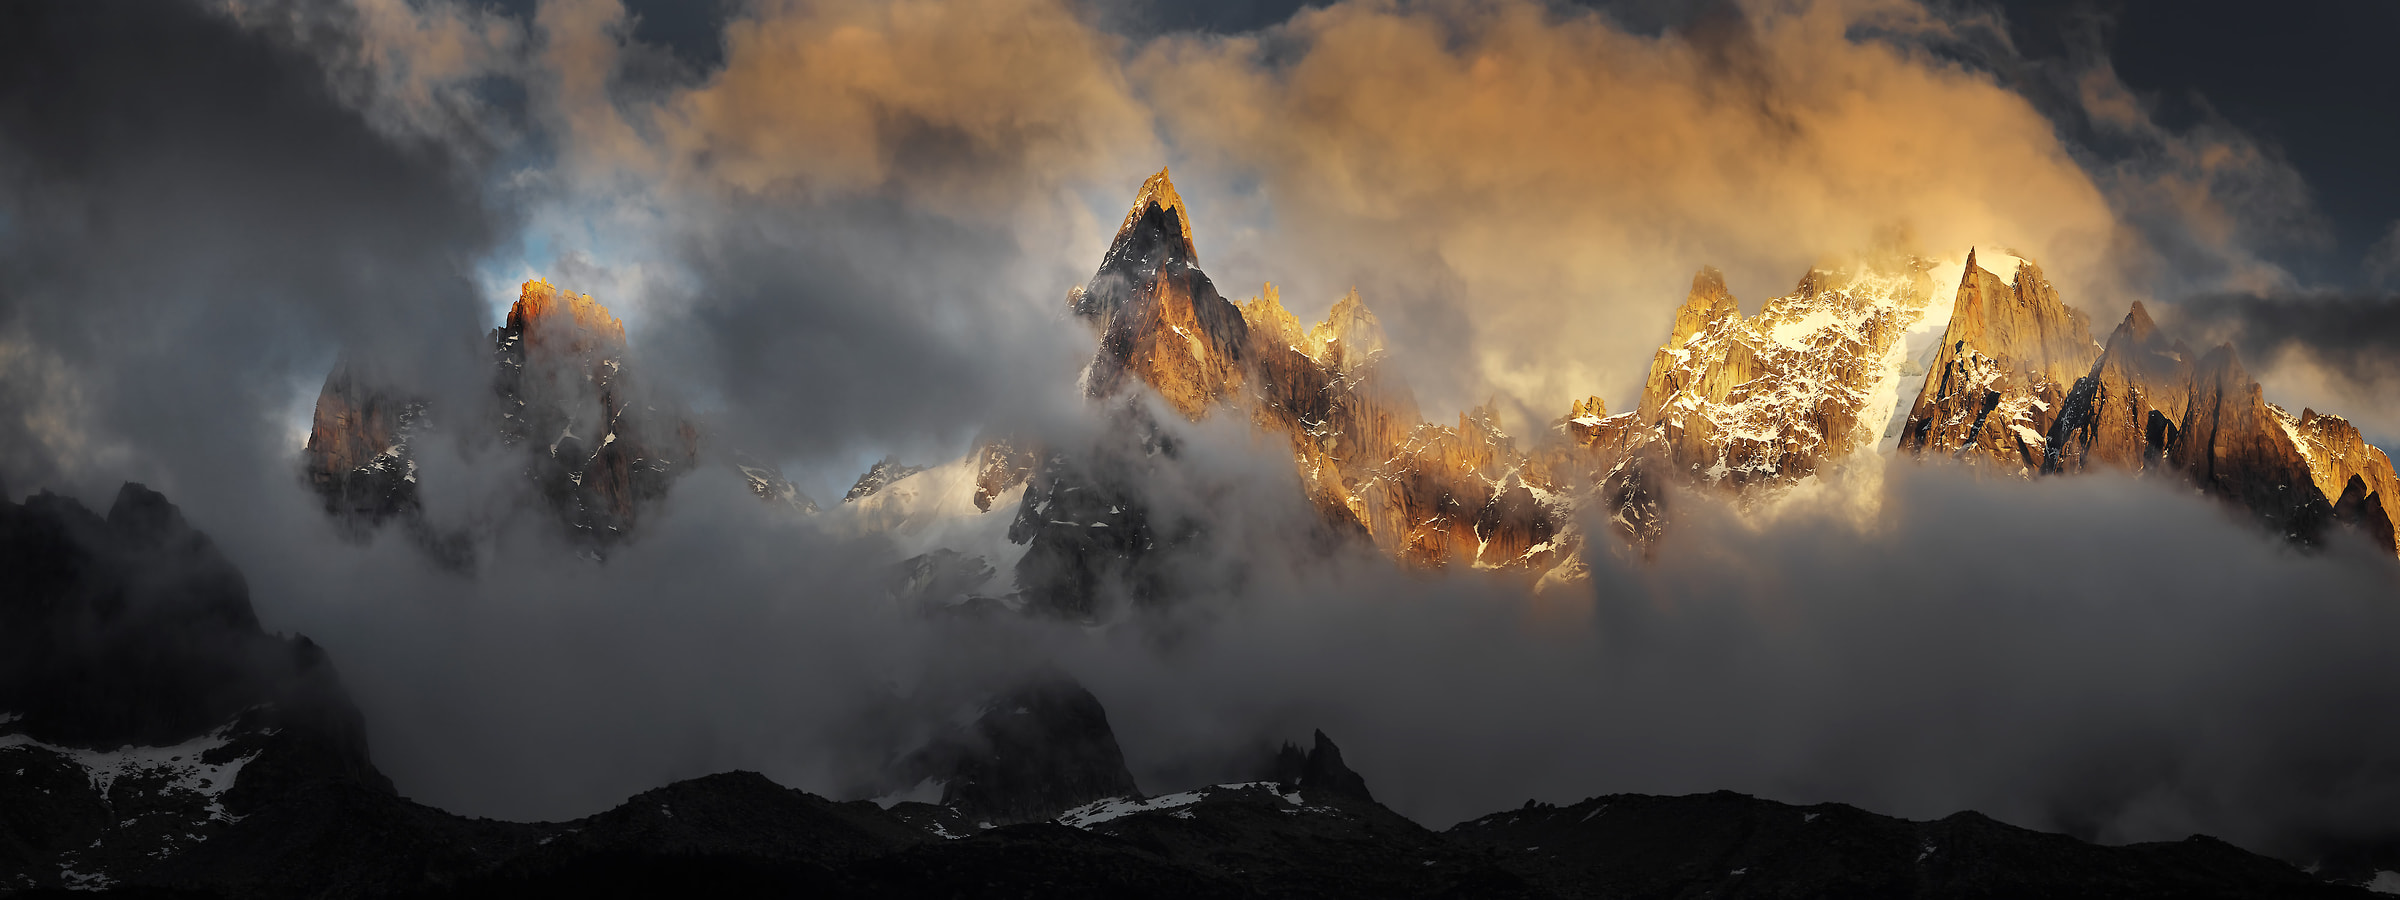 209 megapixels! A very high resolution, large-format VAST photo of stunning mountains at sunset with clouds and fog; fine art landscape print created by Alexandre Deschaumes in Chamonix, France